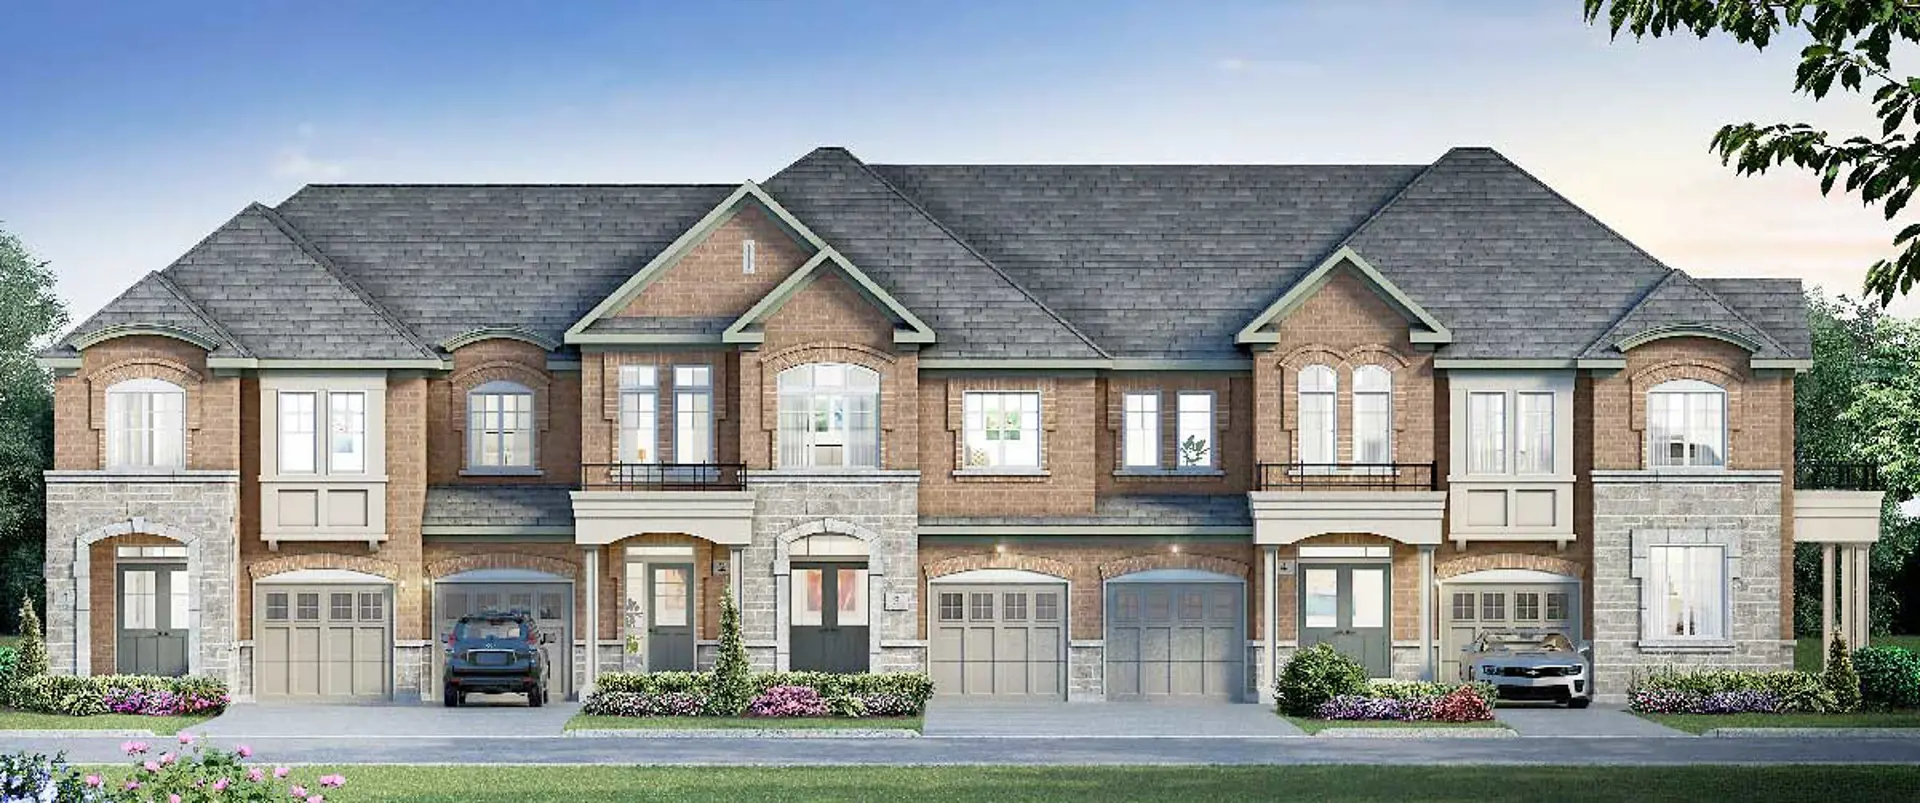 Panorama Towns by Andrin Homes located at Steeles Avenue West & Peru Road,  Milton,   ON image